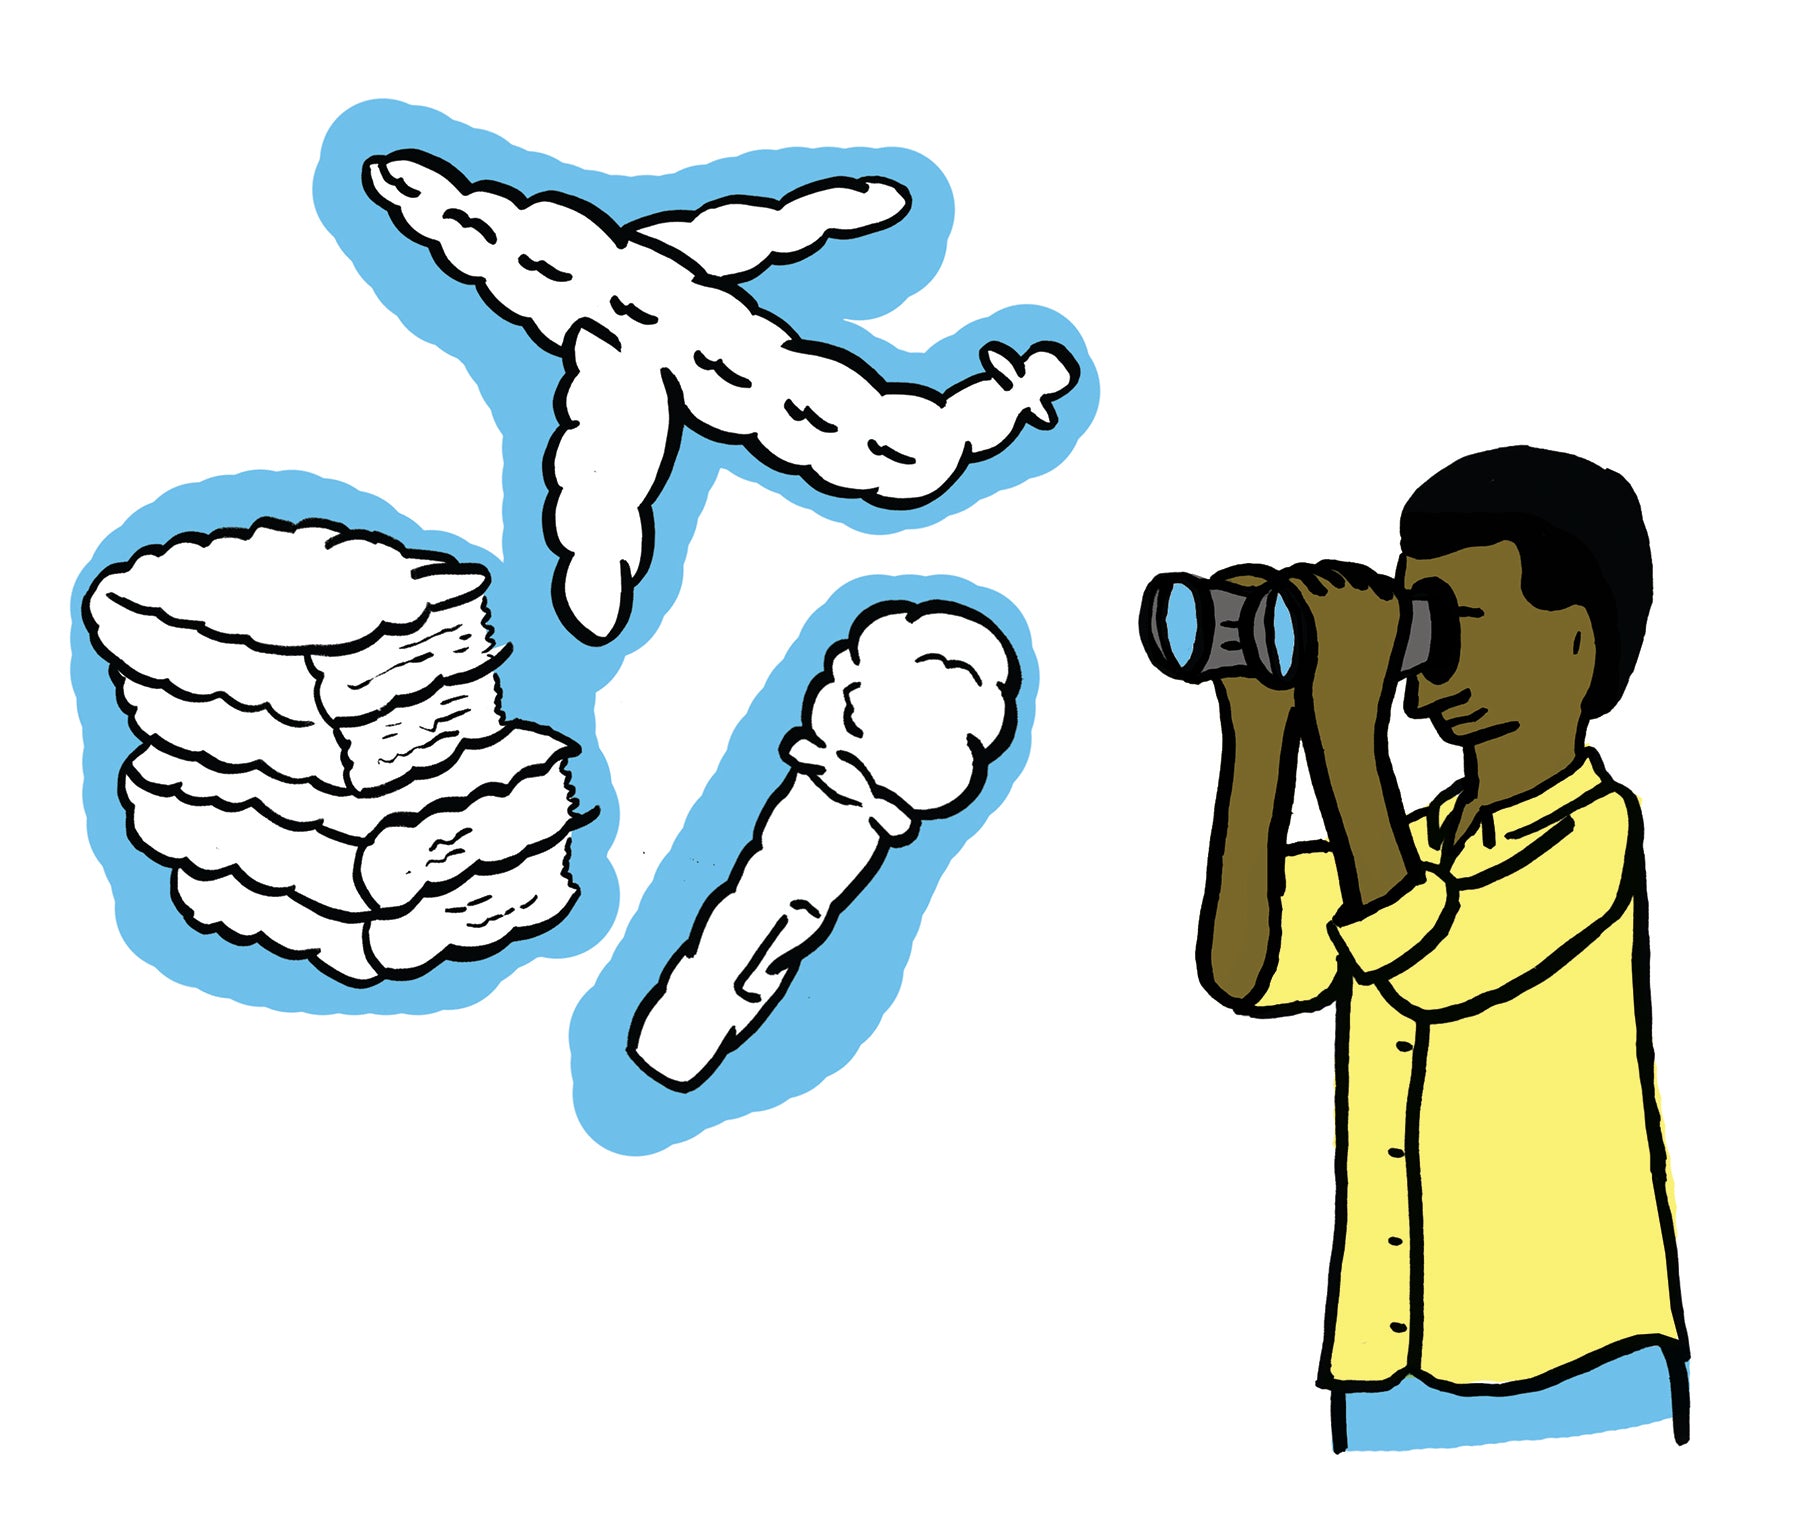 Illustration of a young black man looking through binoculars at clouds in the shape of his future goals (books/learning, airplane/travelling, microphone/public speaking). 